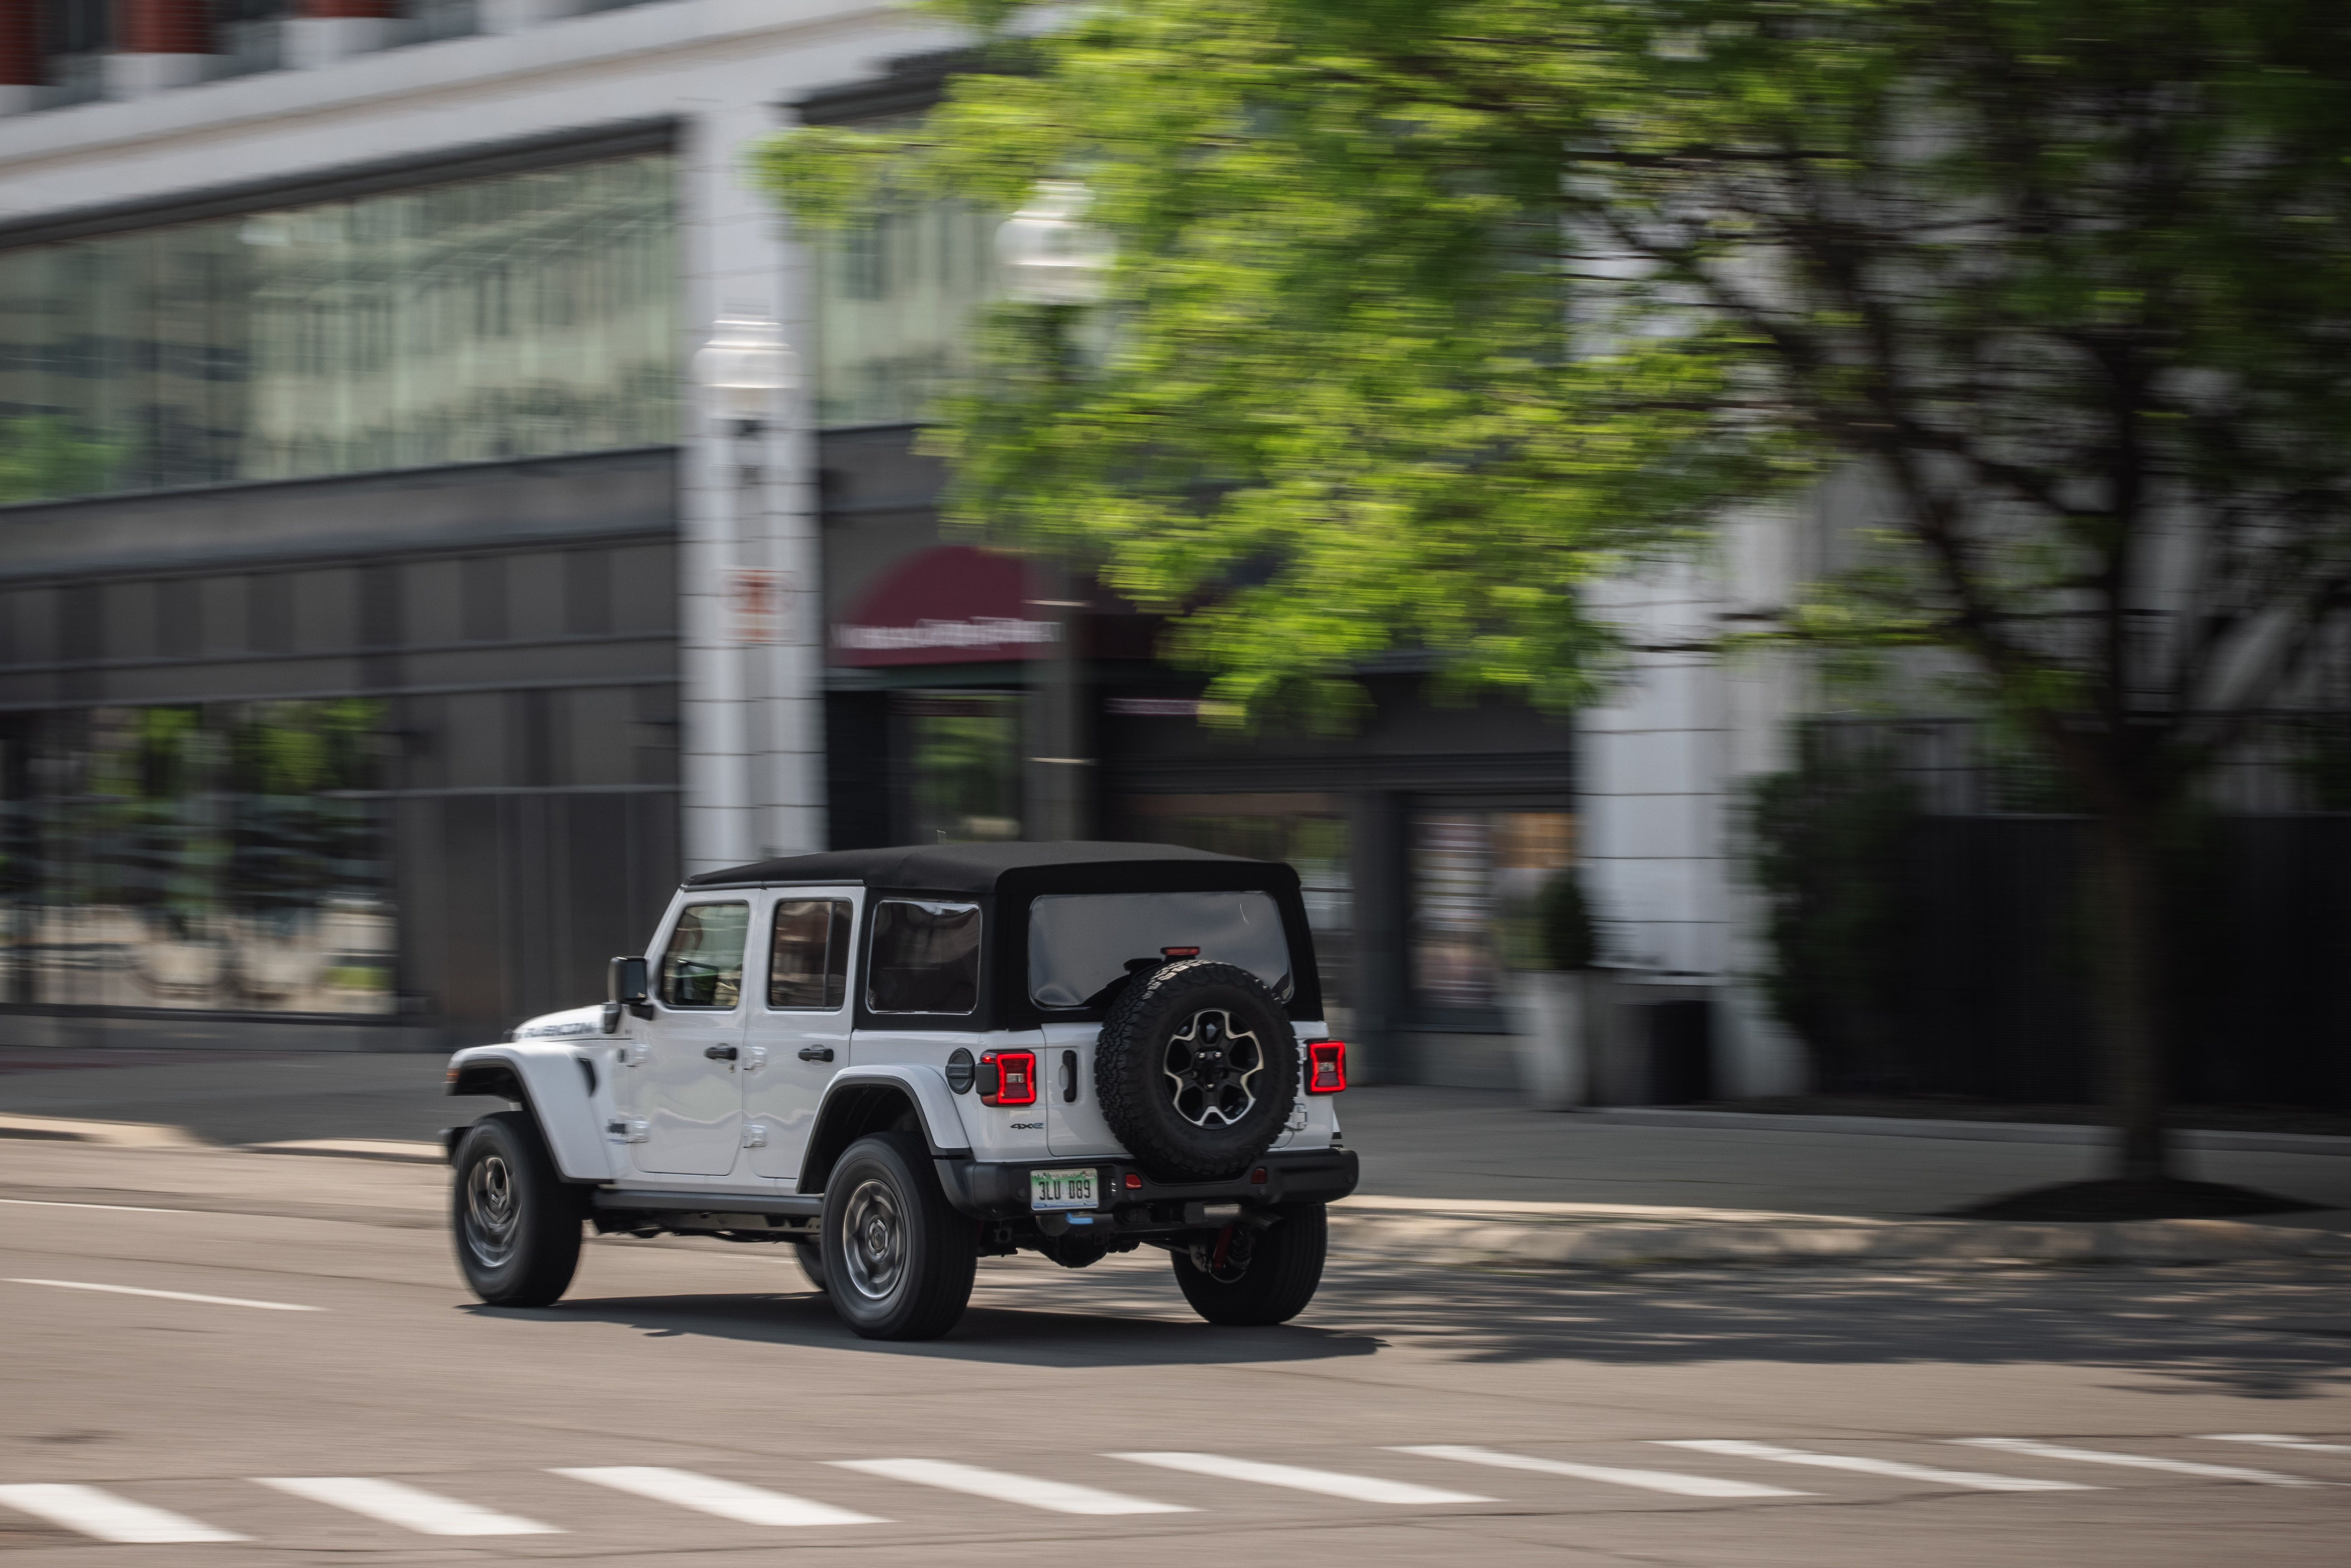 Tested: 2021 Jeep Wrangler 4xe Complicates a Simple Machine